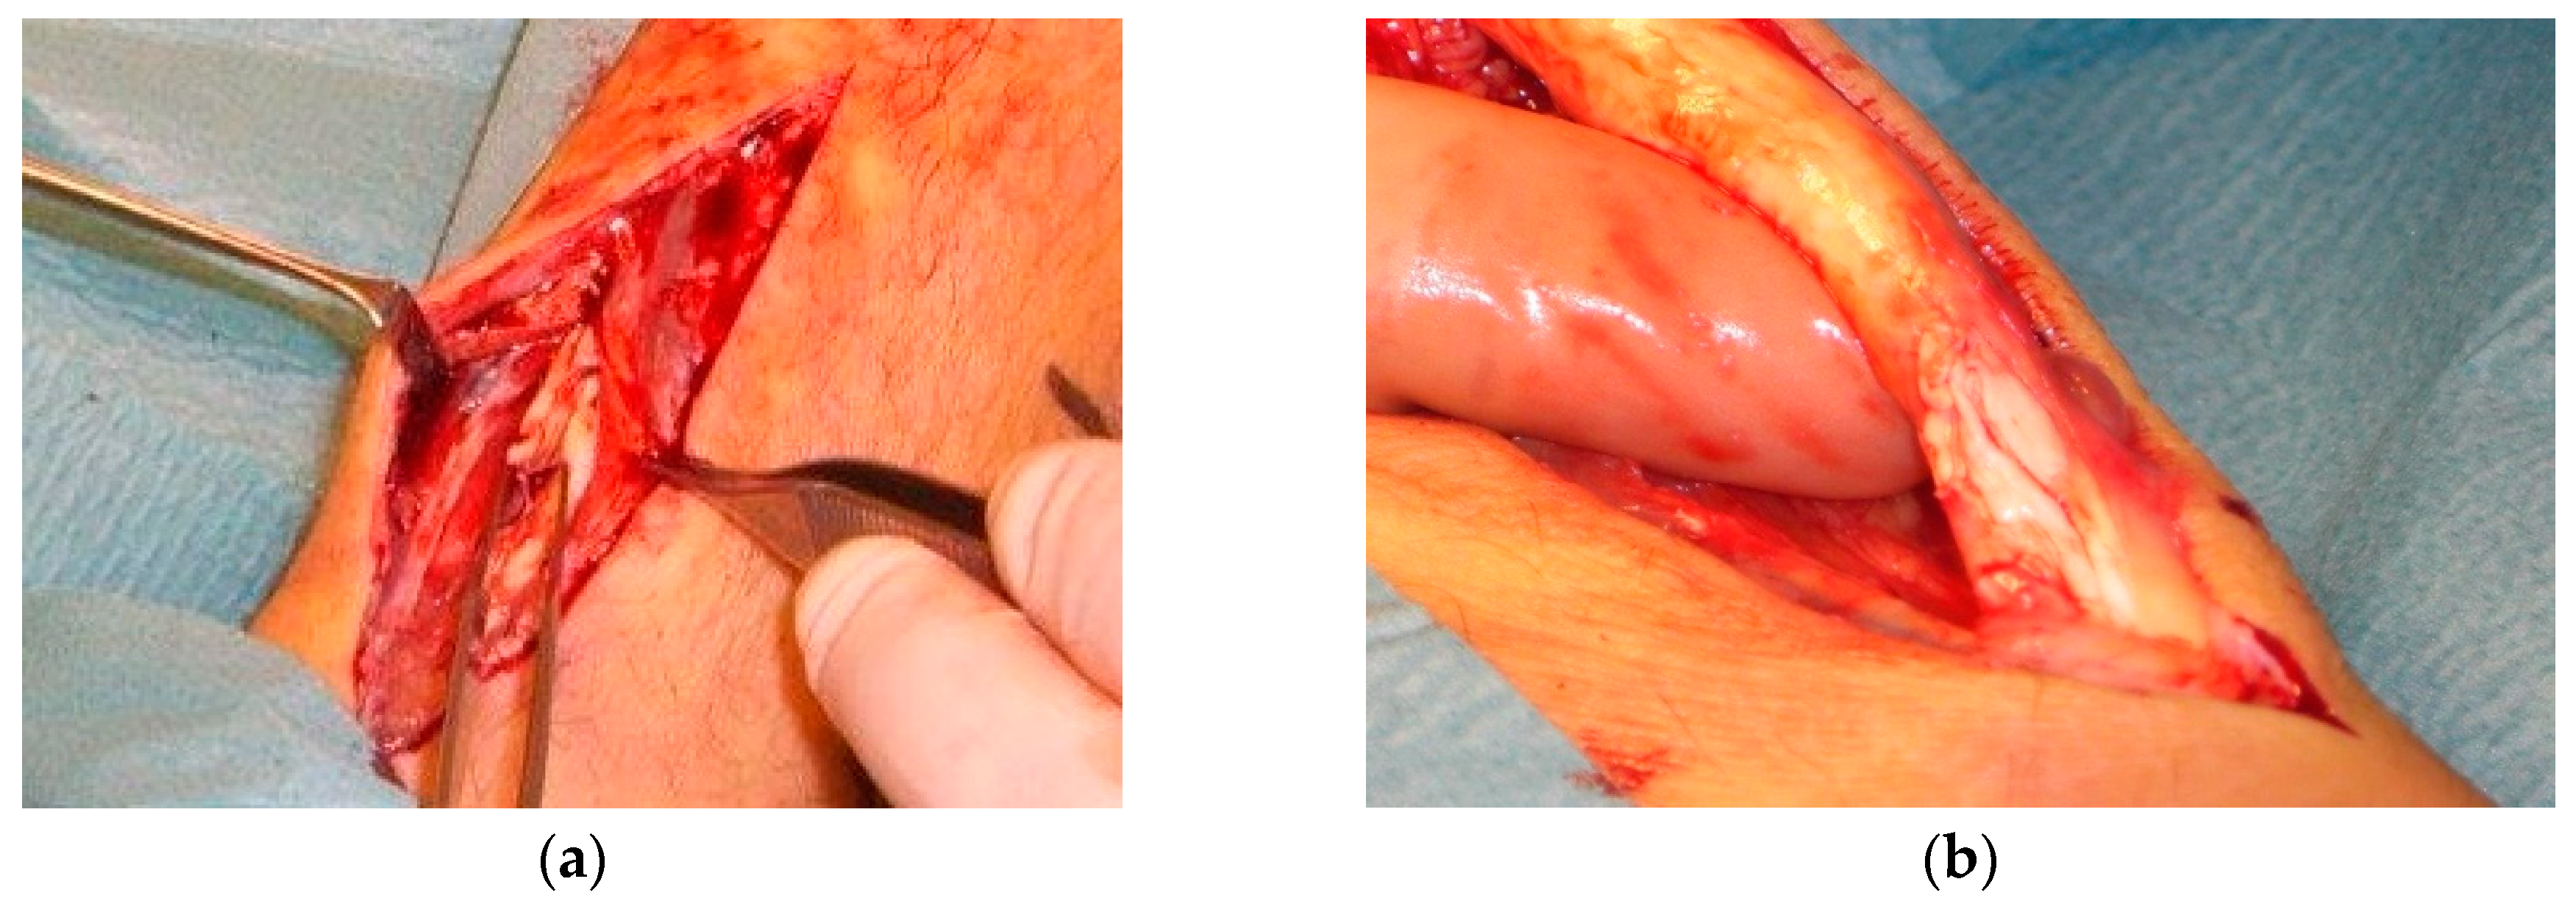 Achilles Tendon Repair Surgery Post-operative Instructions Phase